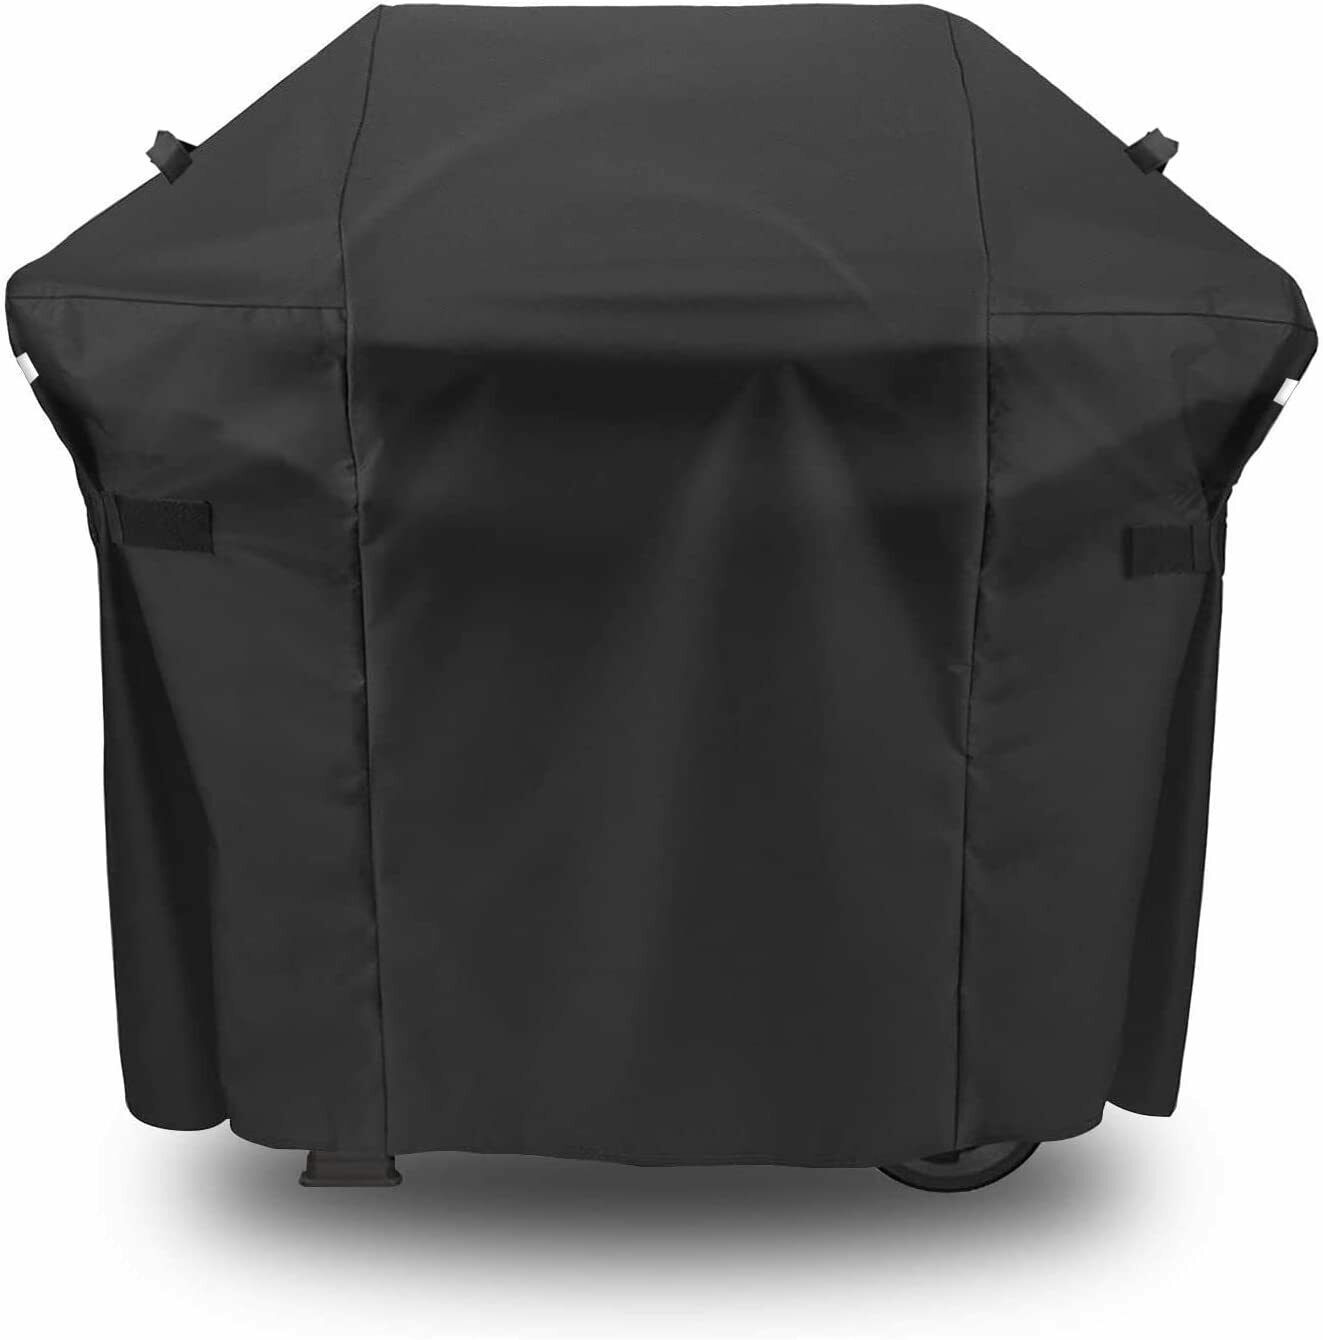 Grill Cover 48 Heavy Duty Waterproof Replacement for Weber Spirit II 200 E210